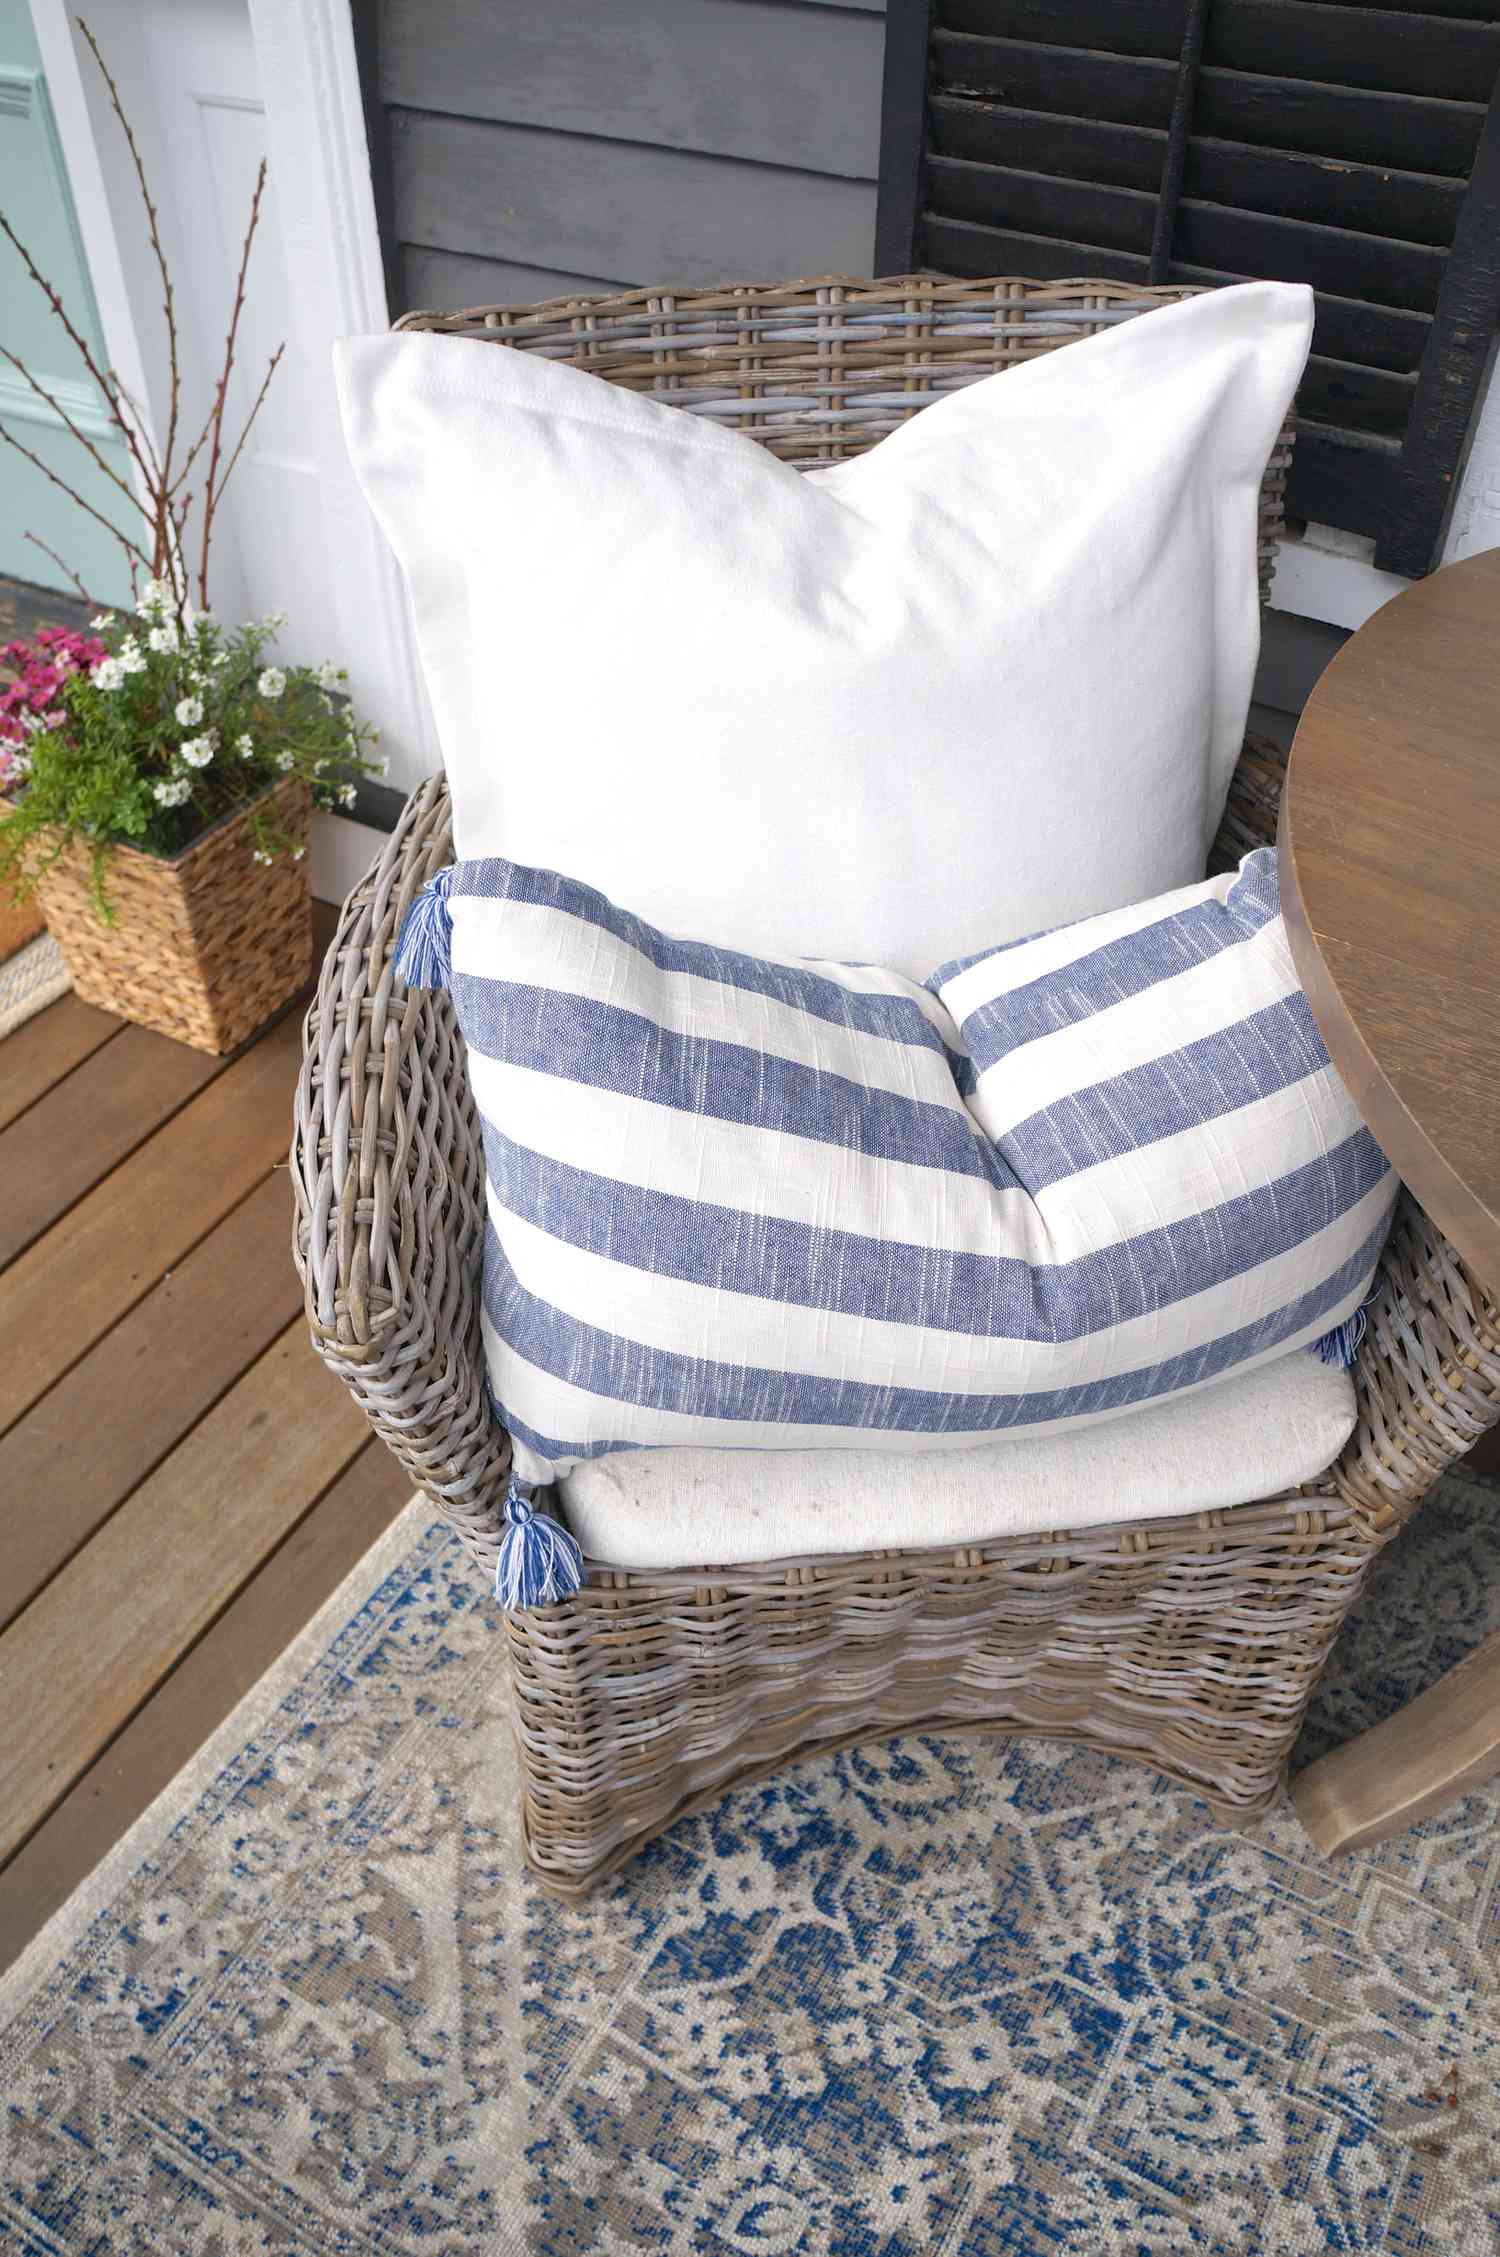 Blue and white pillows and rug on a porch